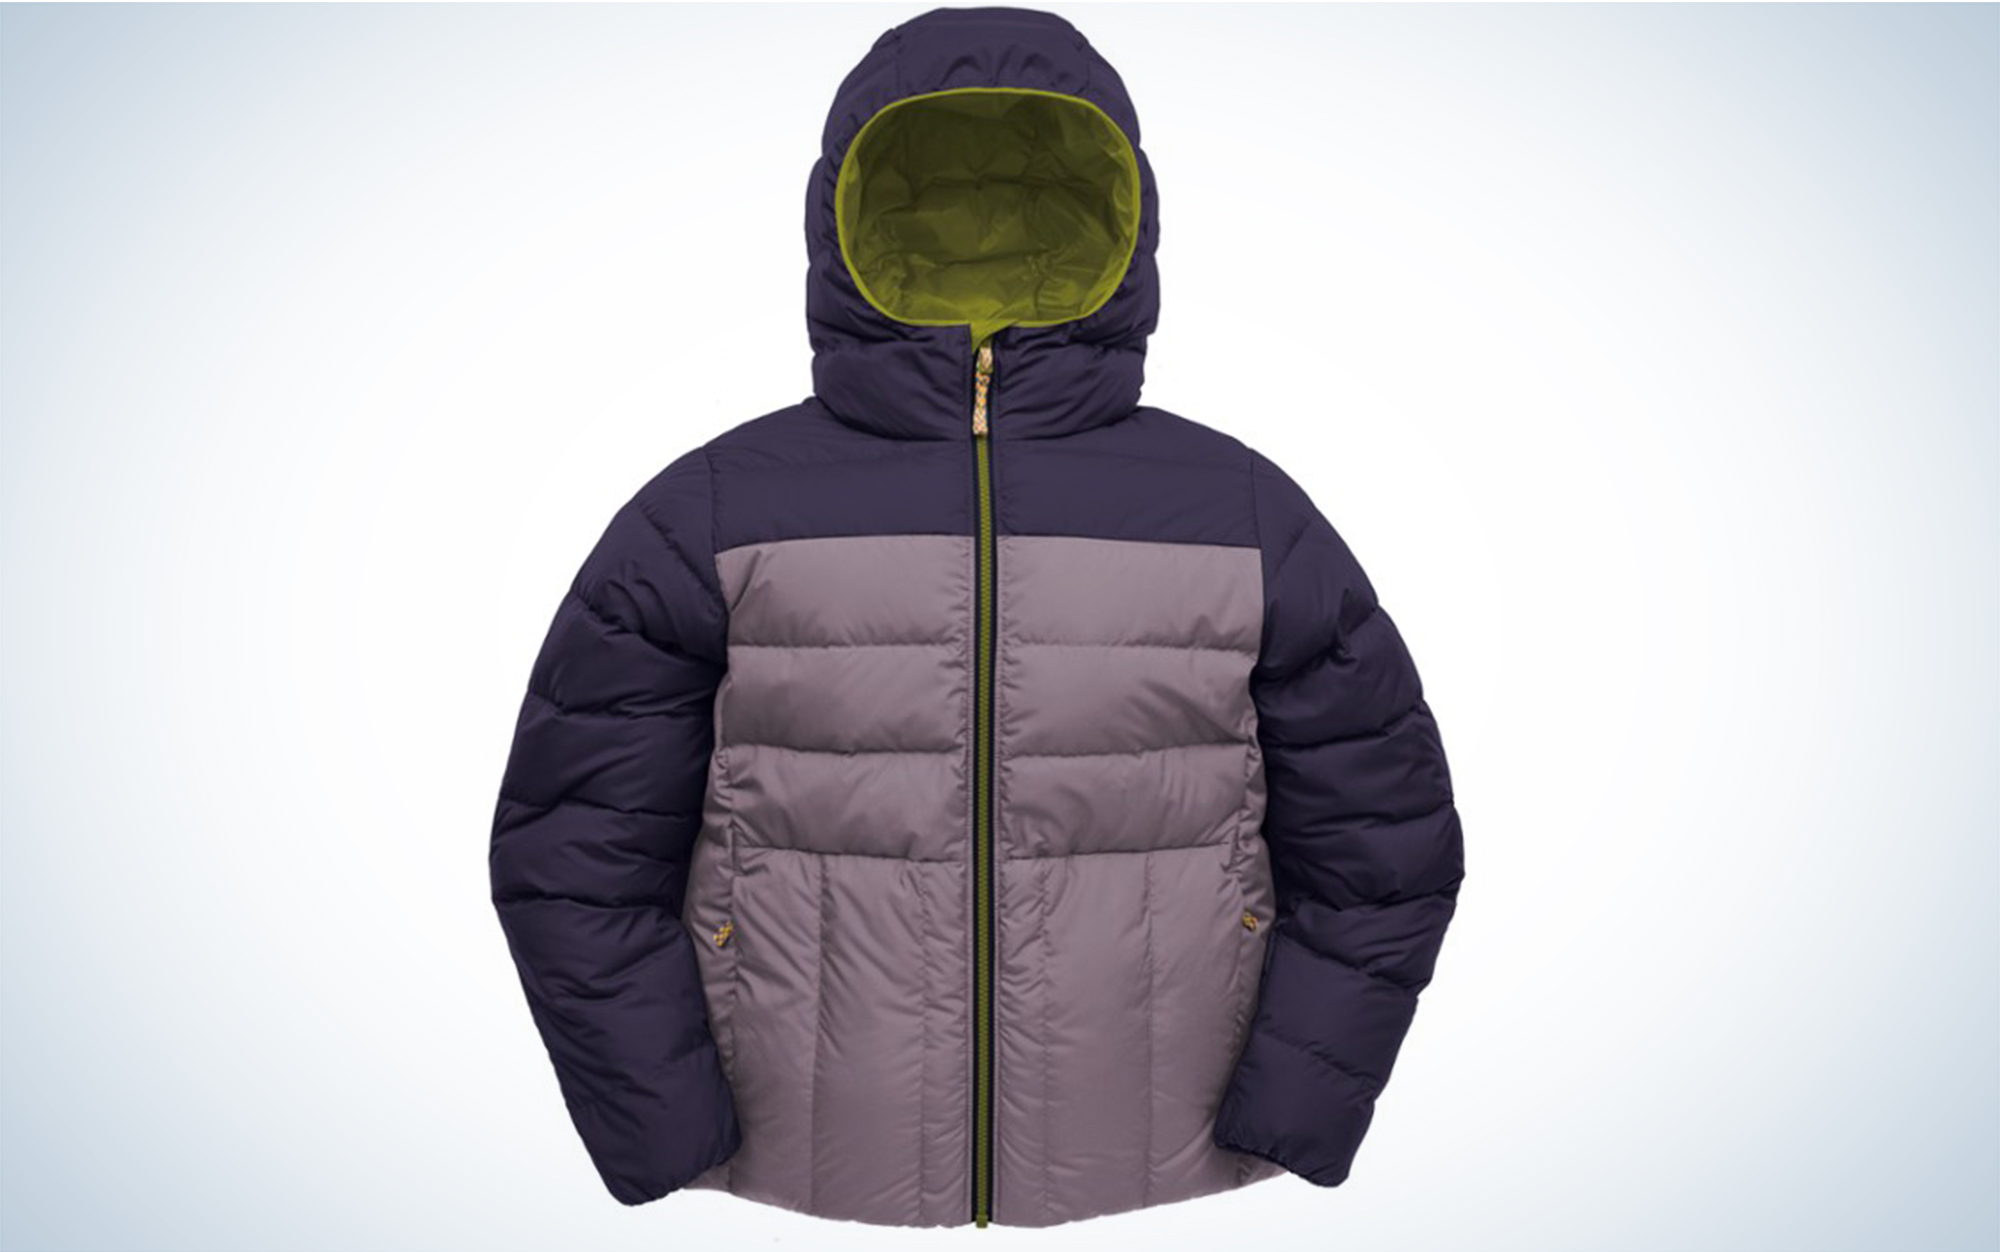 The Big Agnes Kids’ Ice House Hoodie is the best hiking jacket for kids.